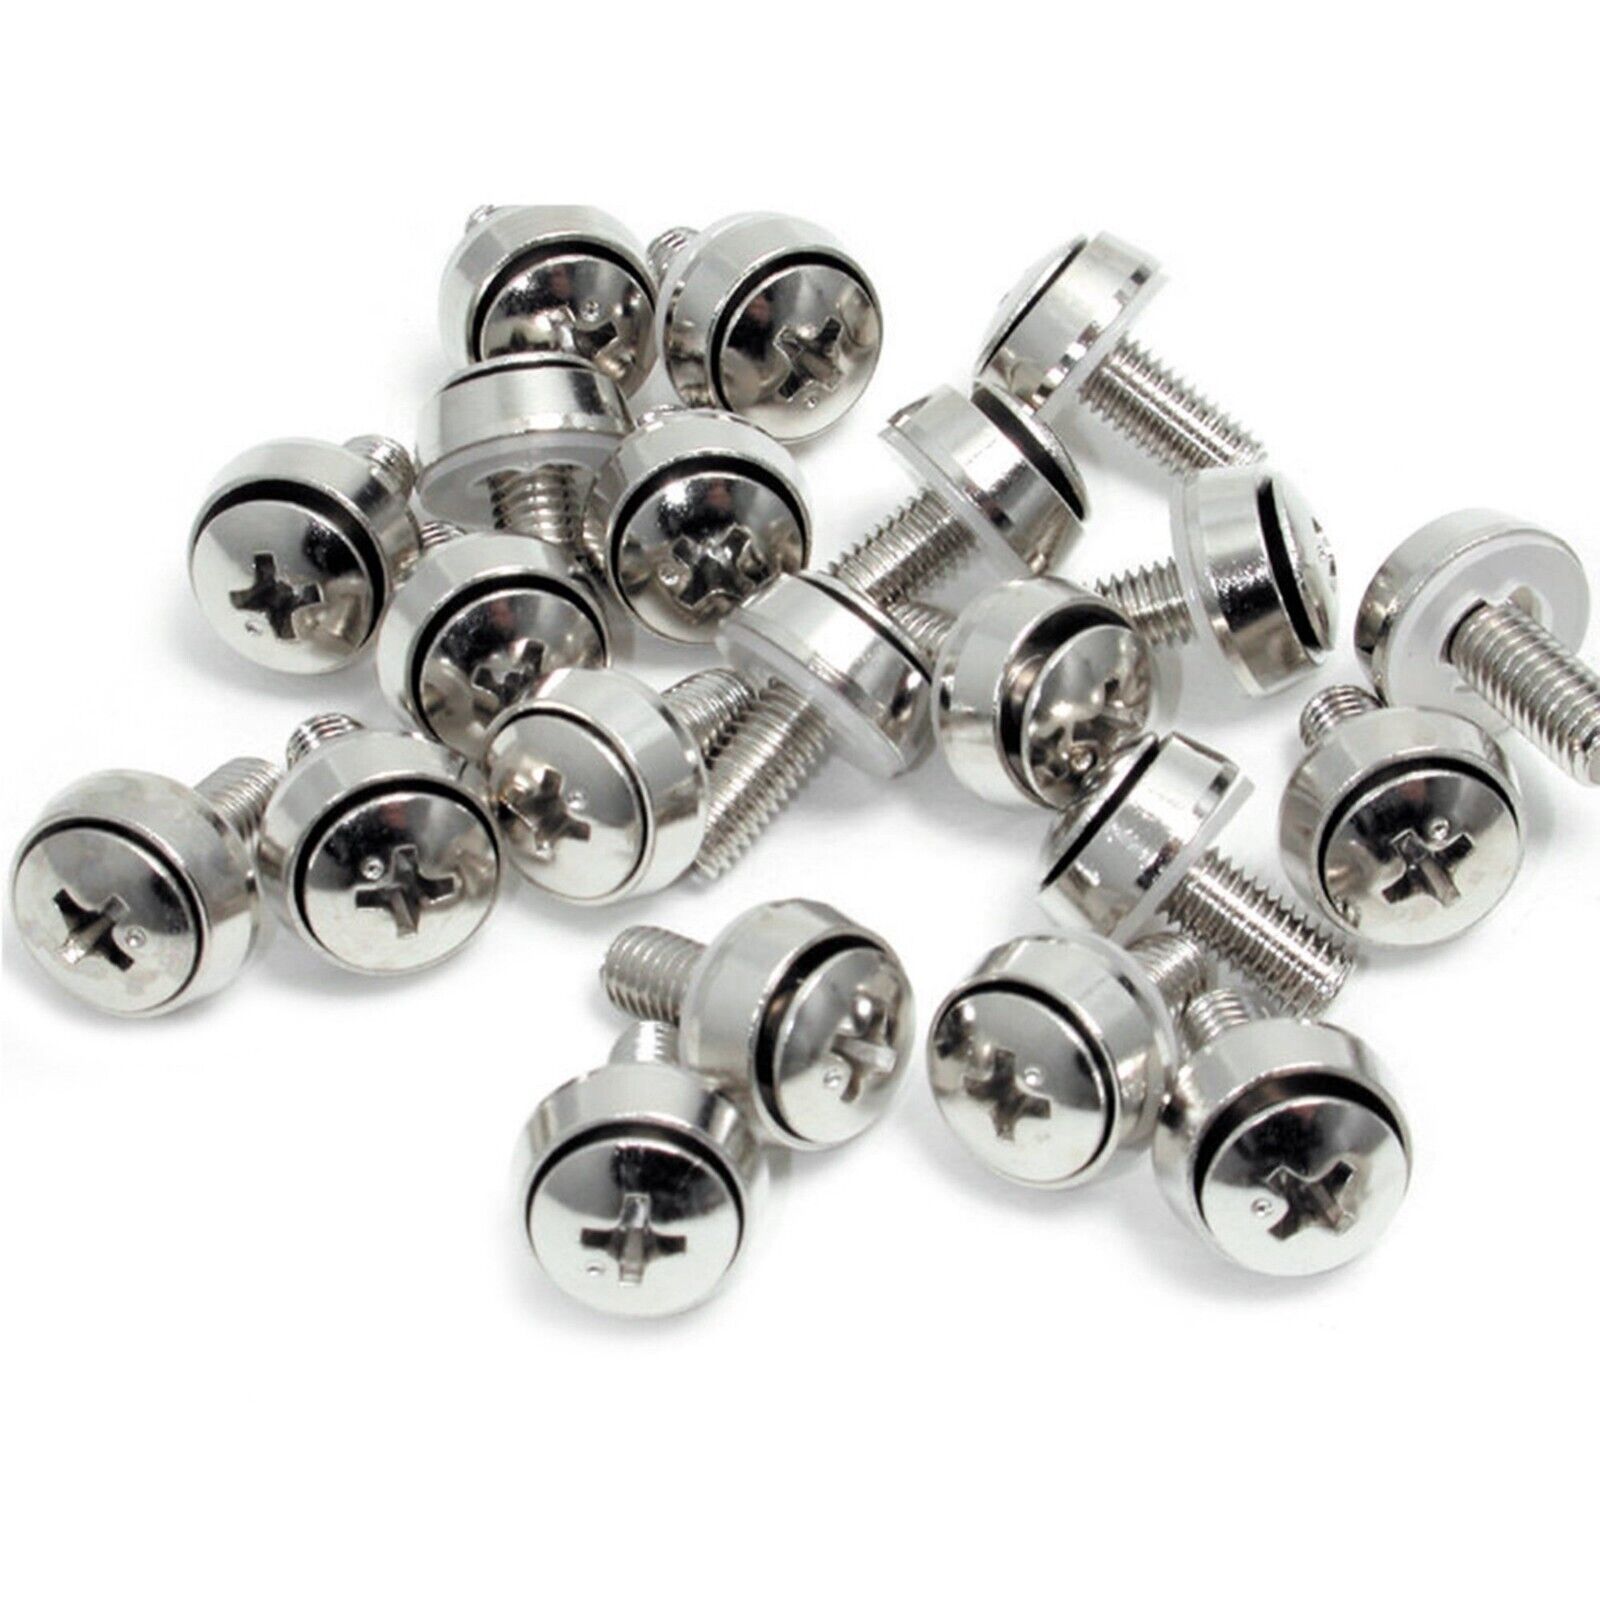  100 Pk M6 Rack Mount Screws with washers for Server Cabinet 